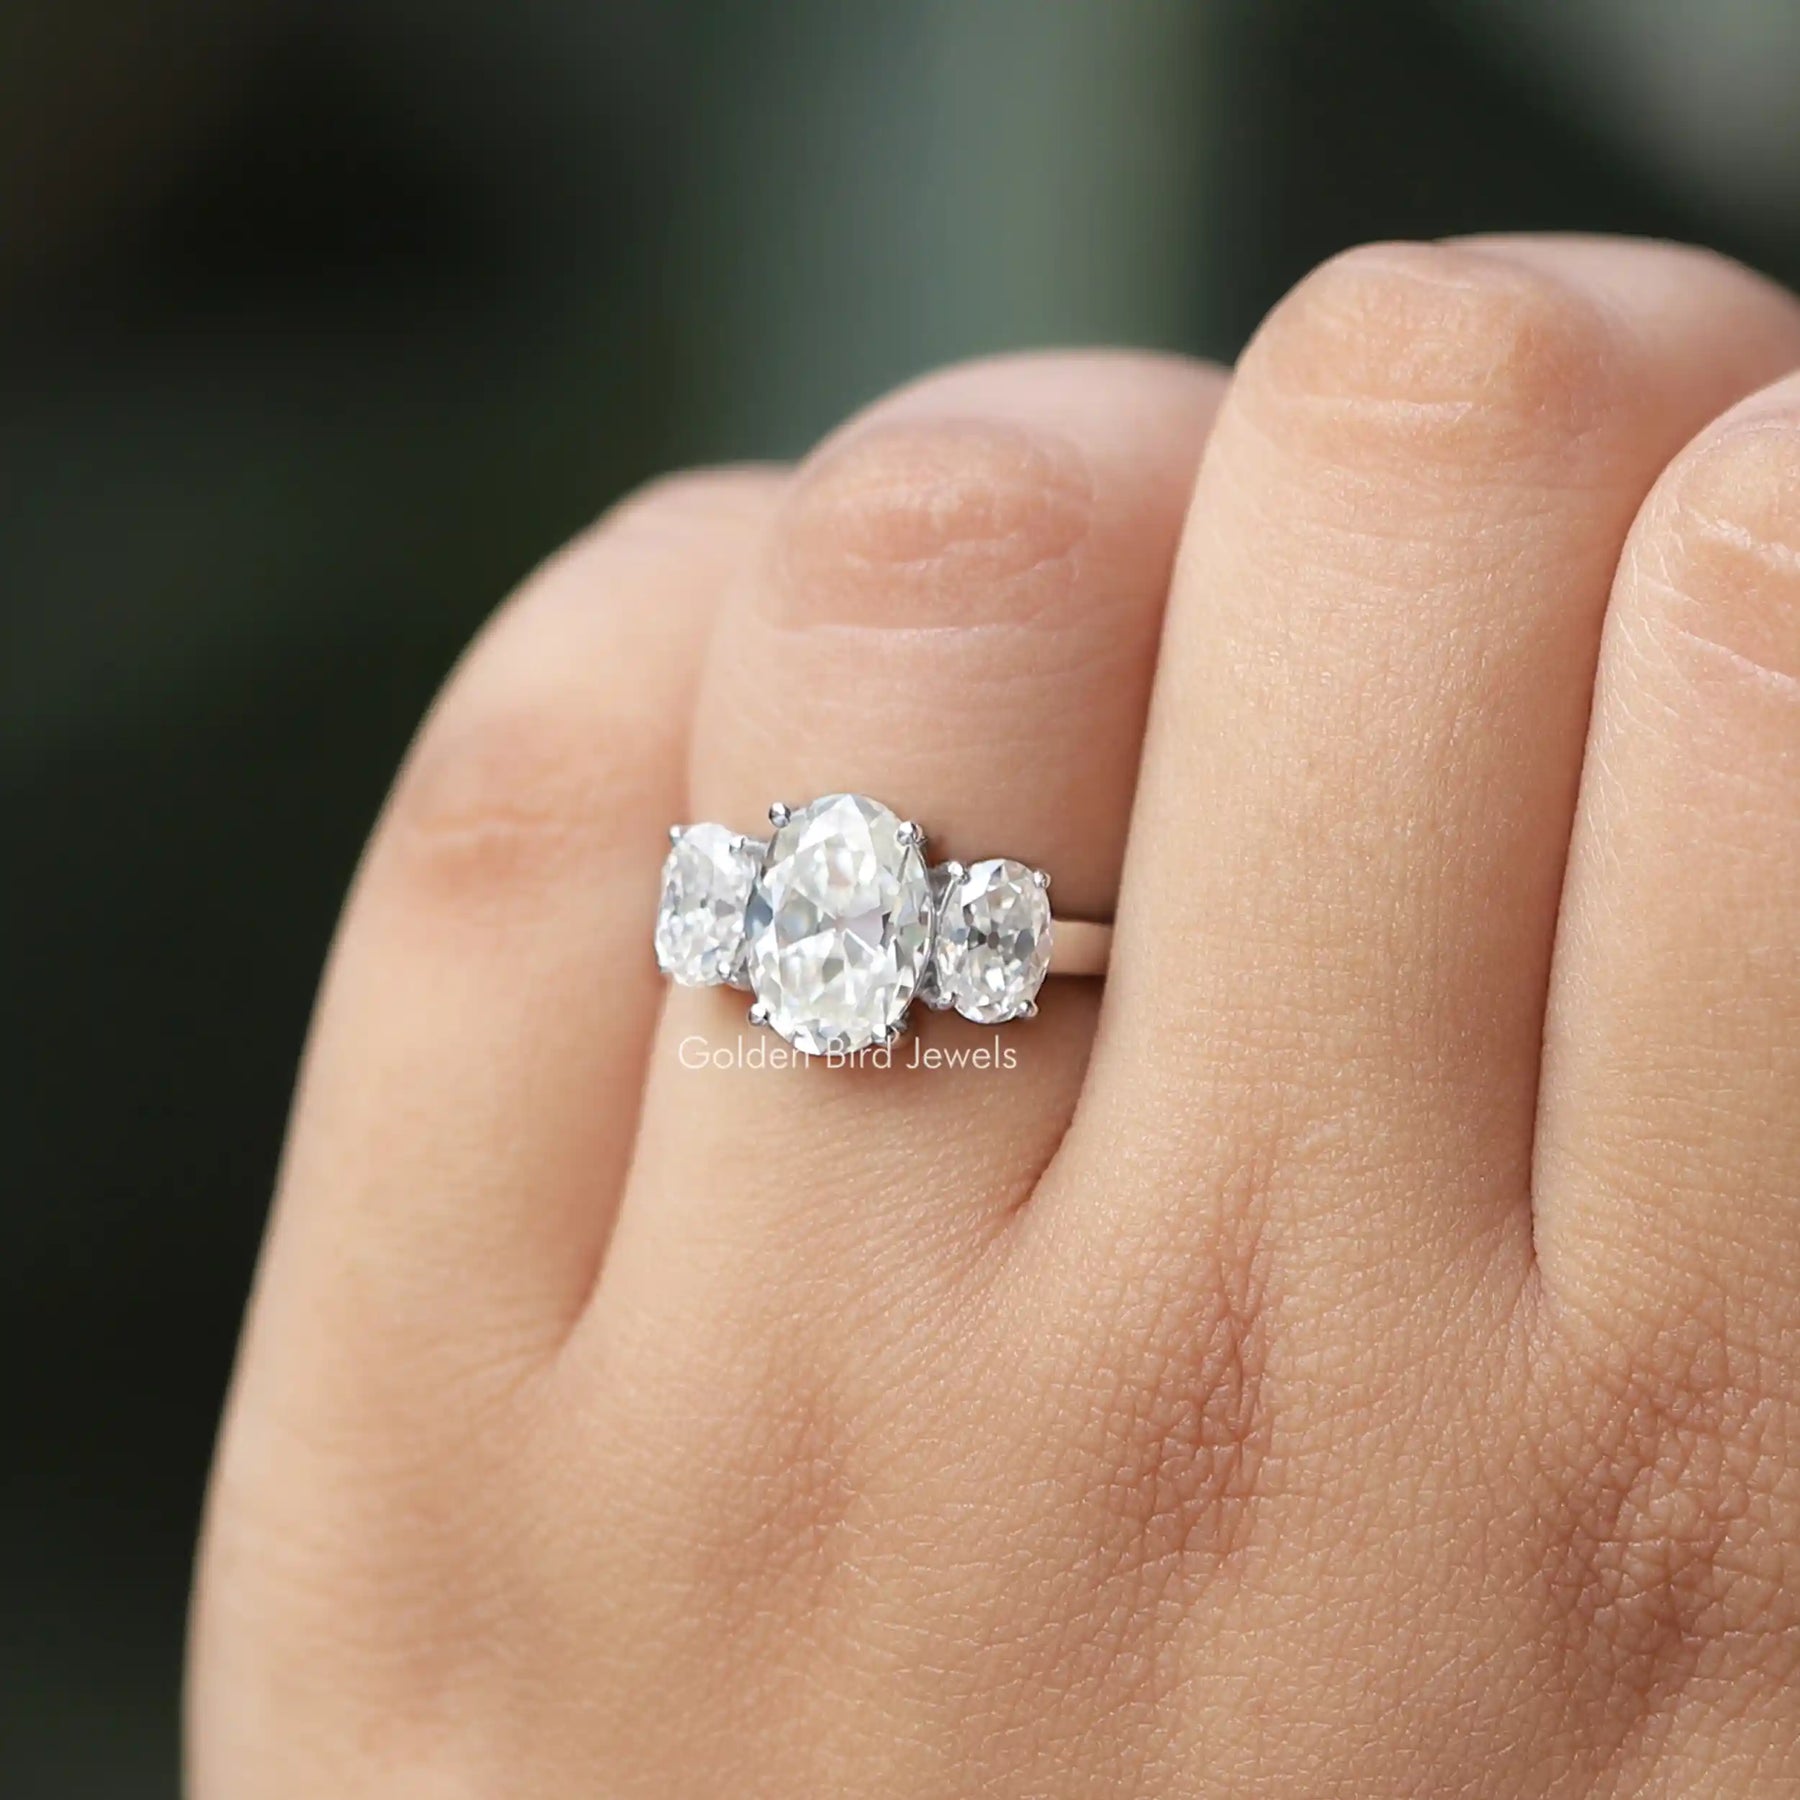 [In hand front view of oval cut moissanite engagement ring]-[Golden Bird Jewels]